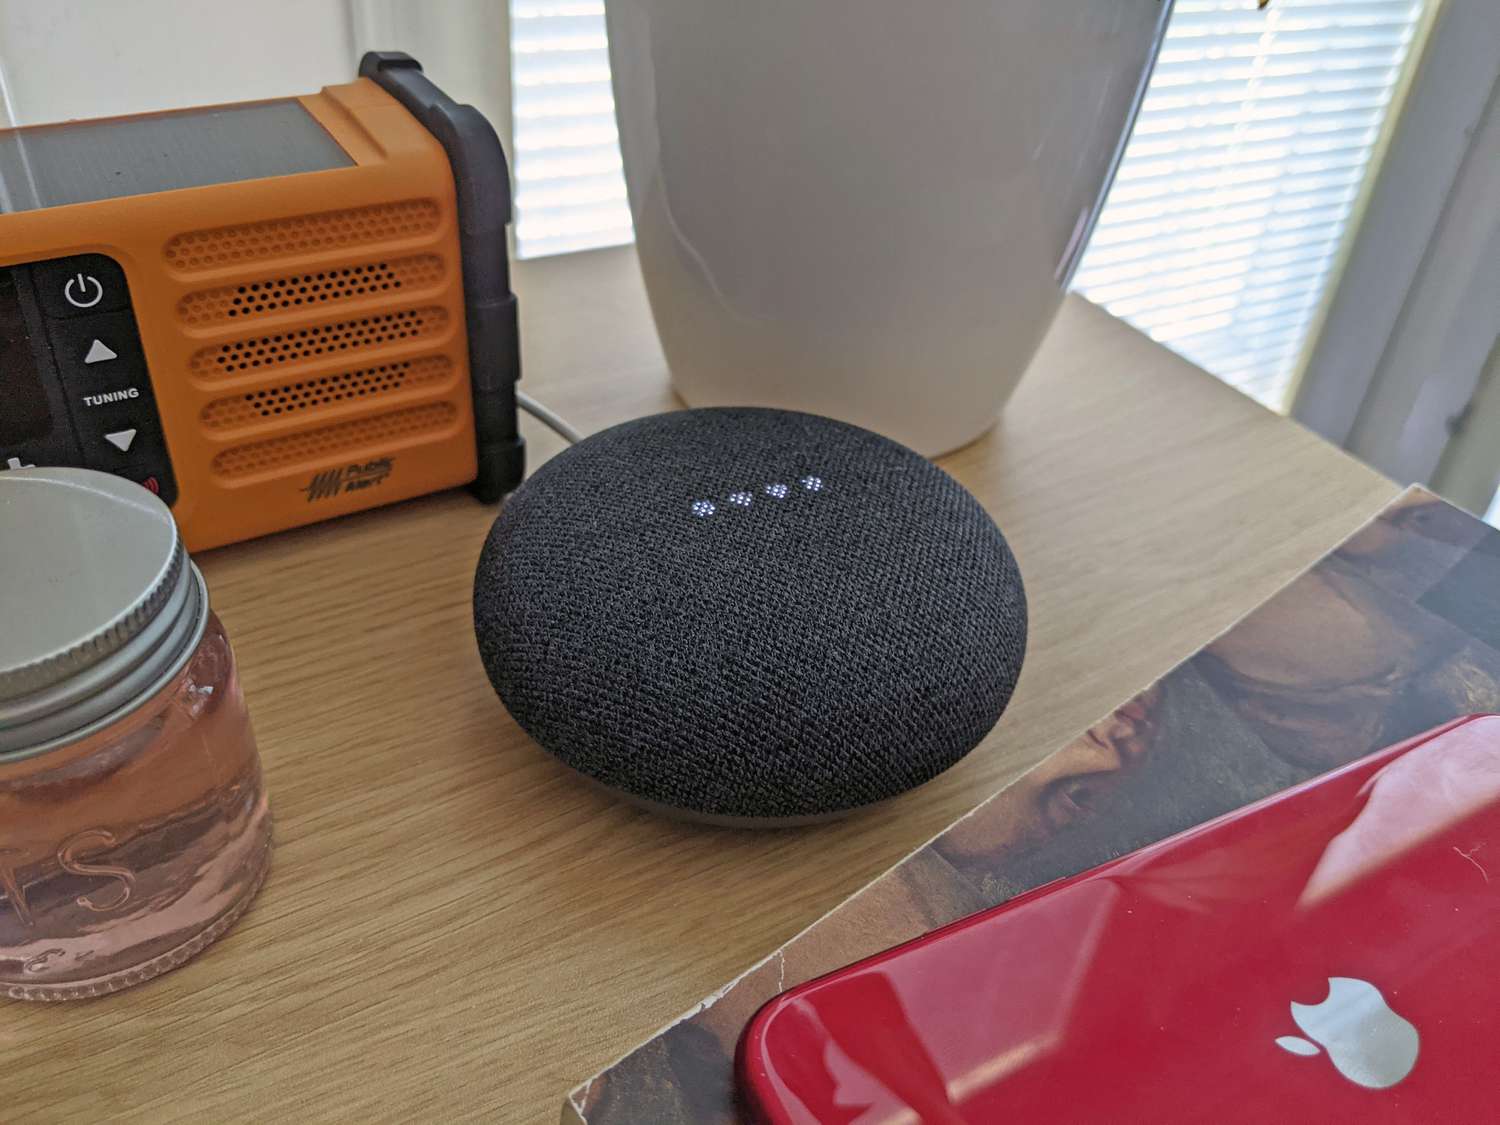 Why Is My Google Home Making A Popping Noise?